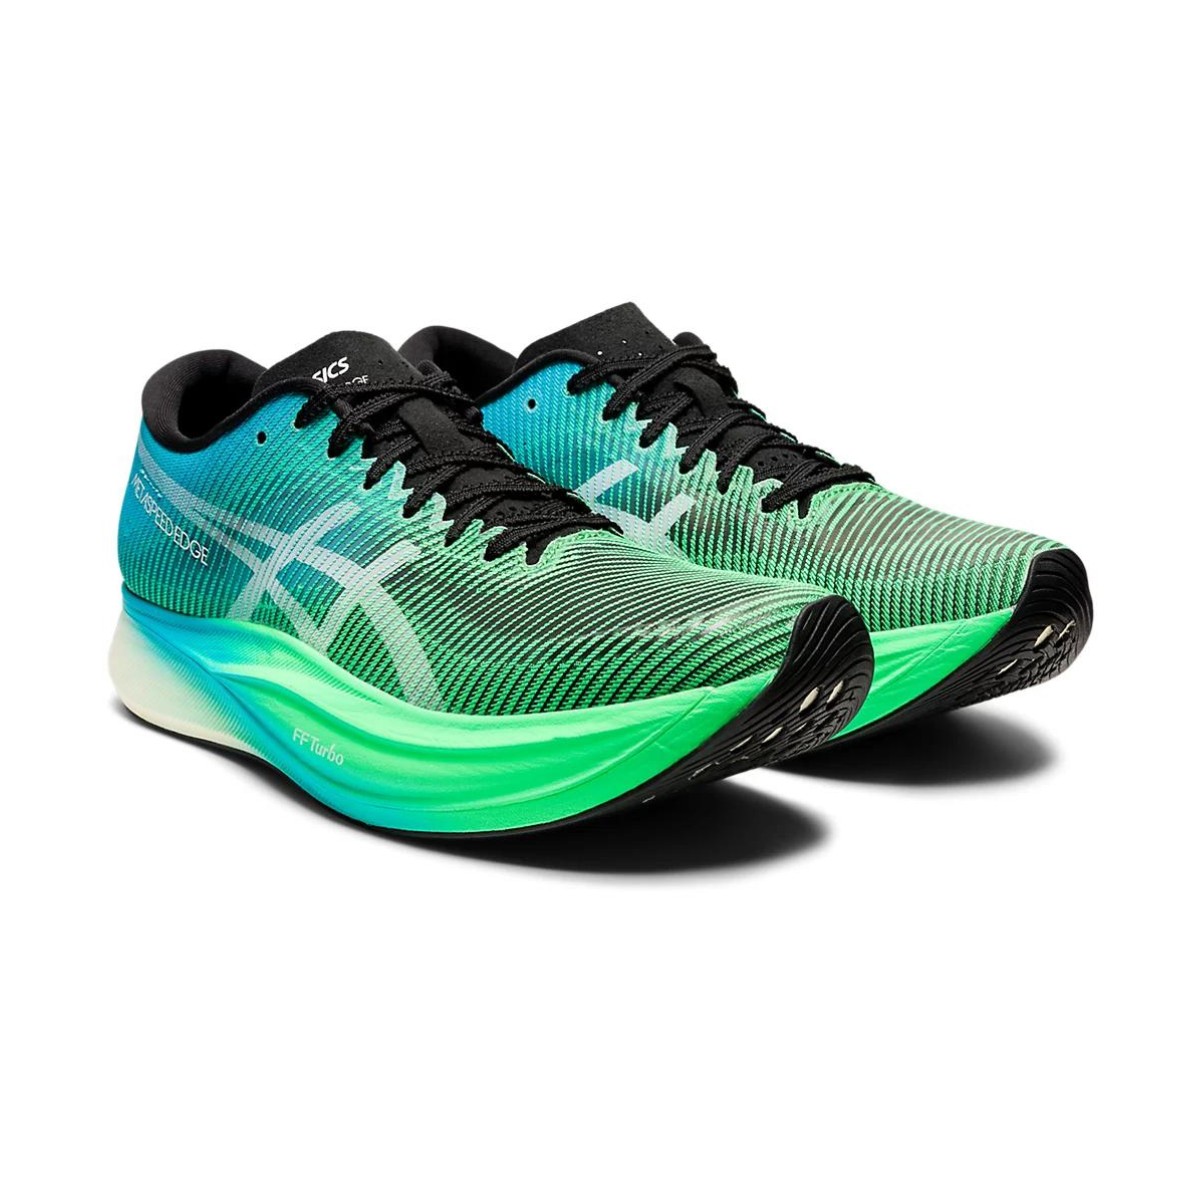 Buy Asics Metaspeed Edge+ Green SS23 Shoes. The best price